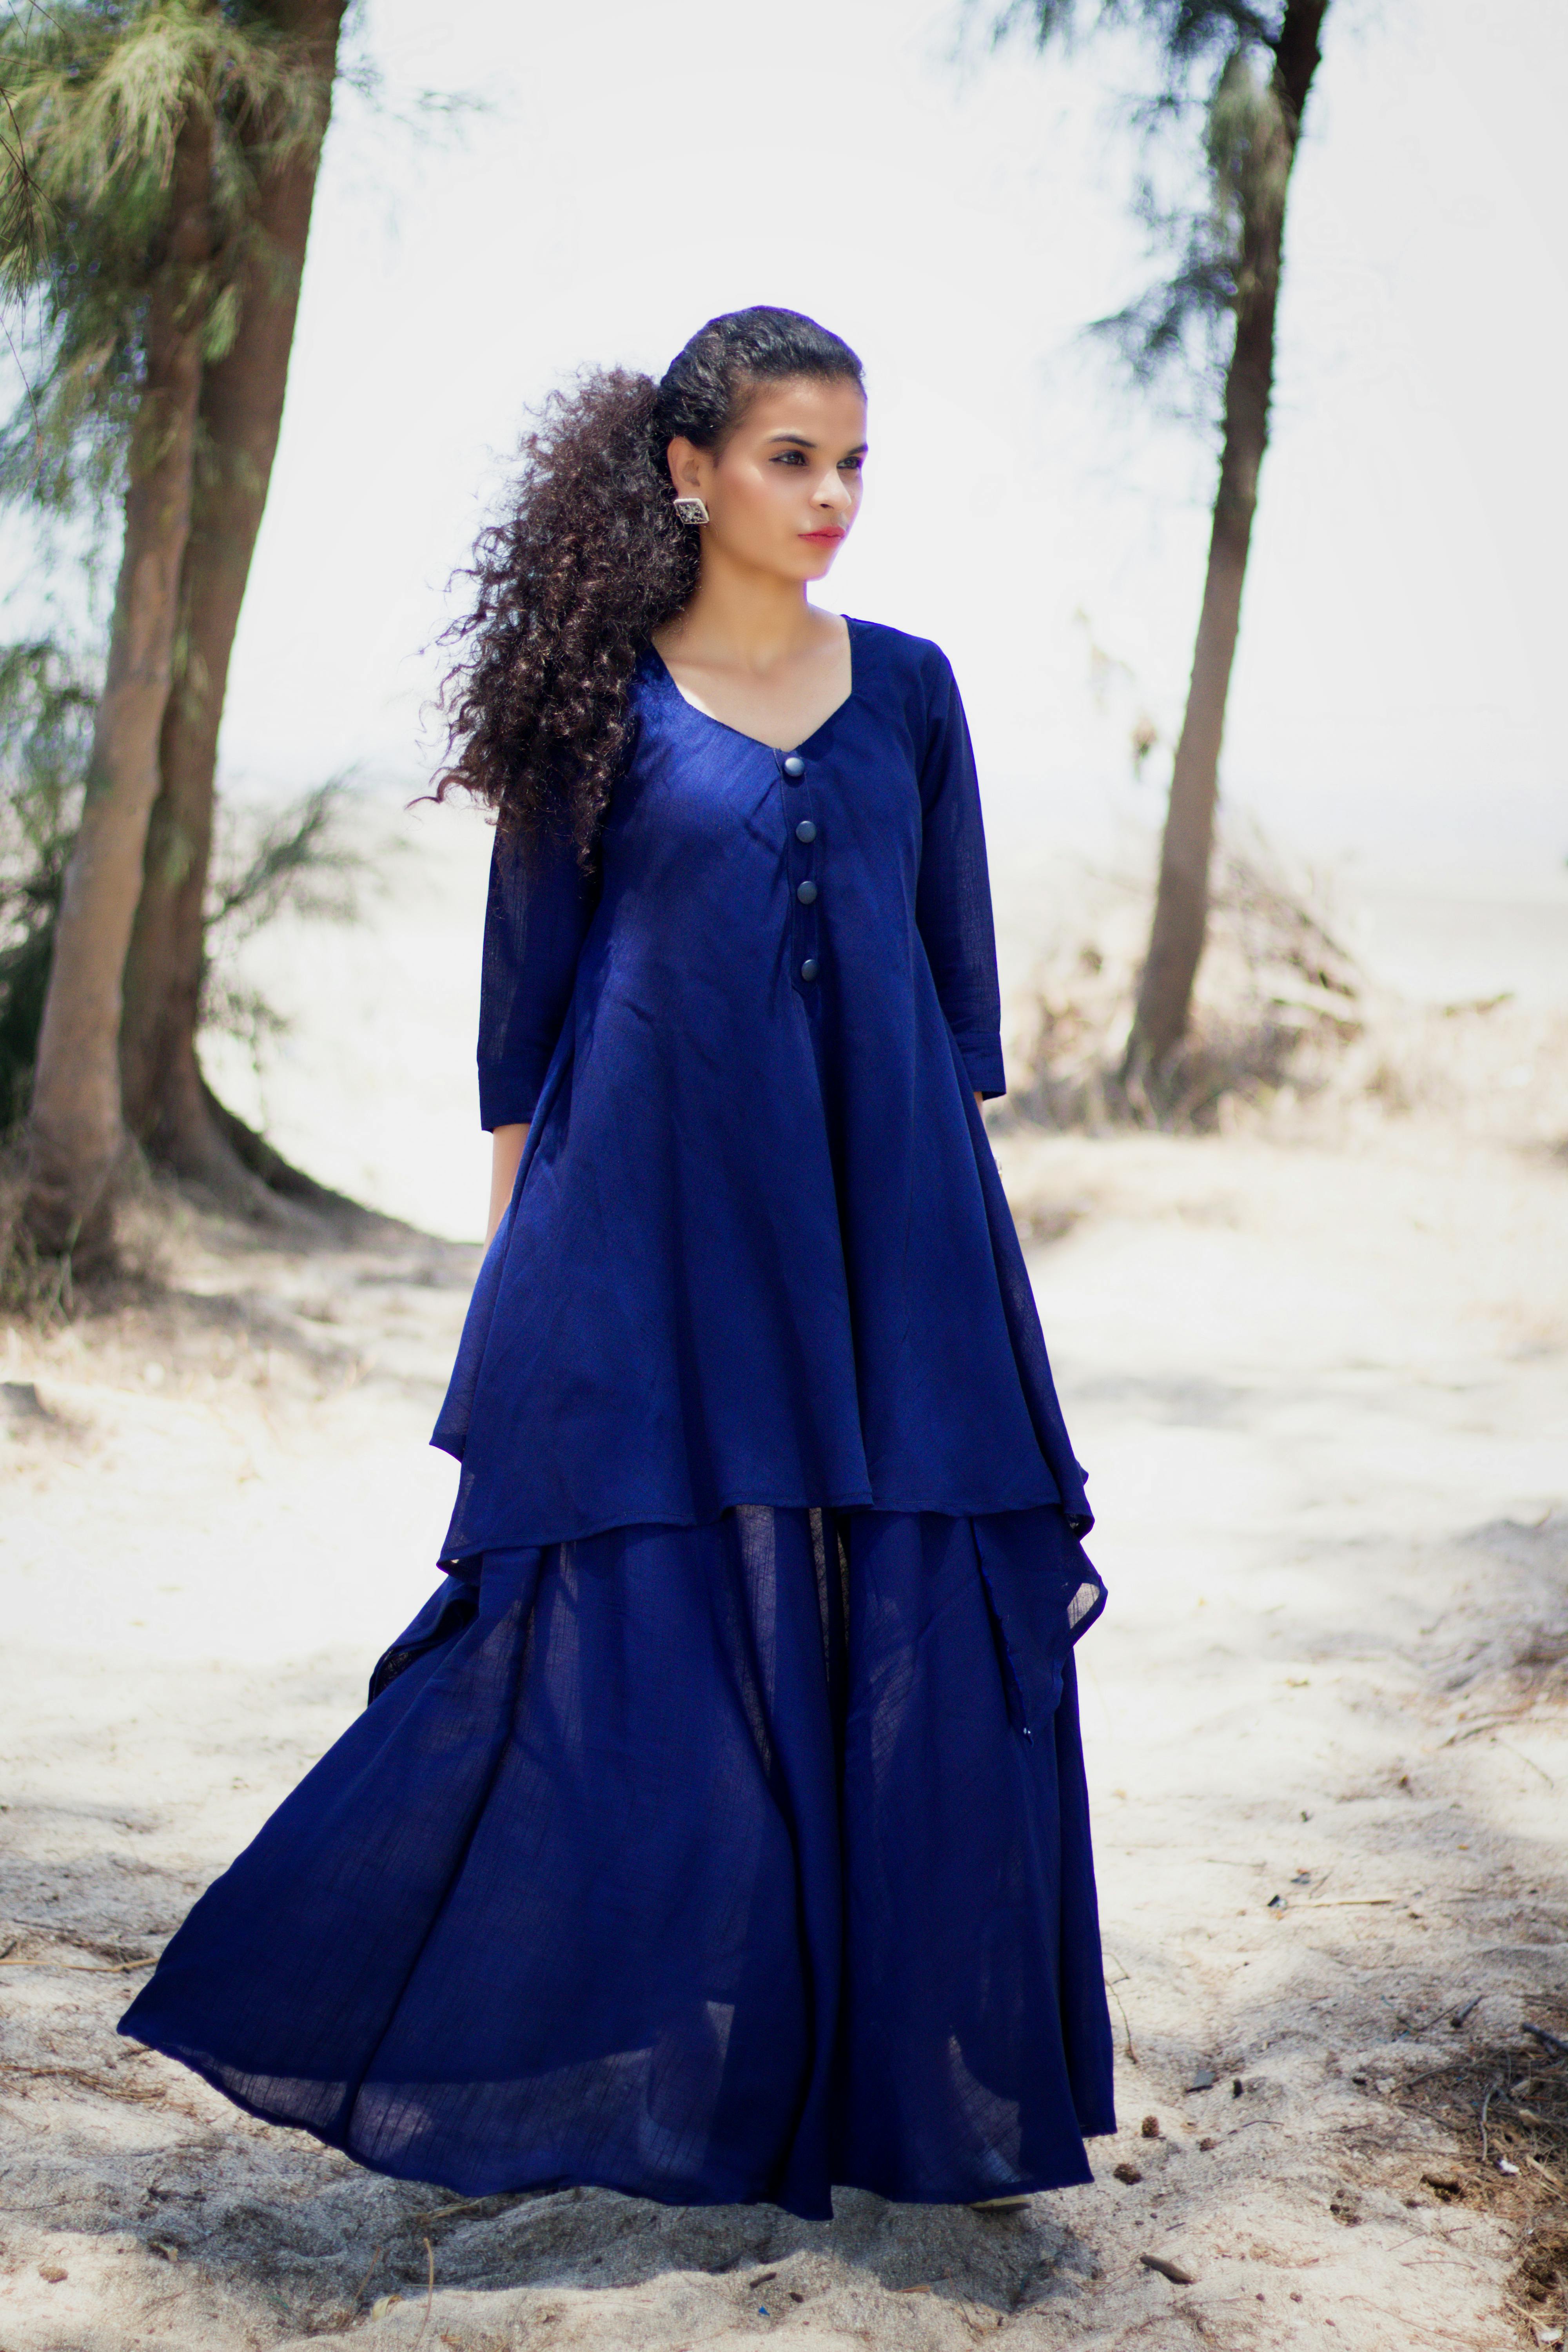 Blue Indian Gowns - Buy Indian Gown online at Clothsvilla.com